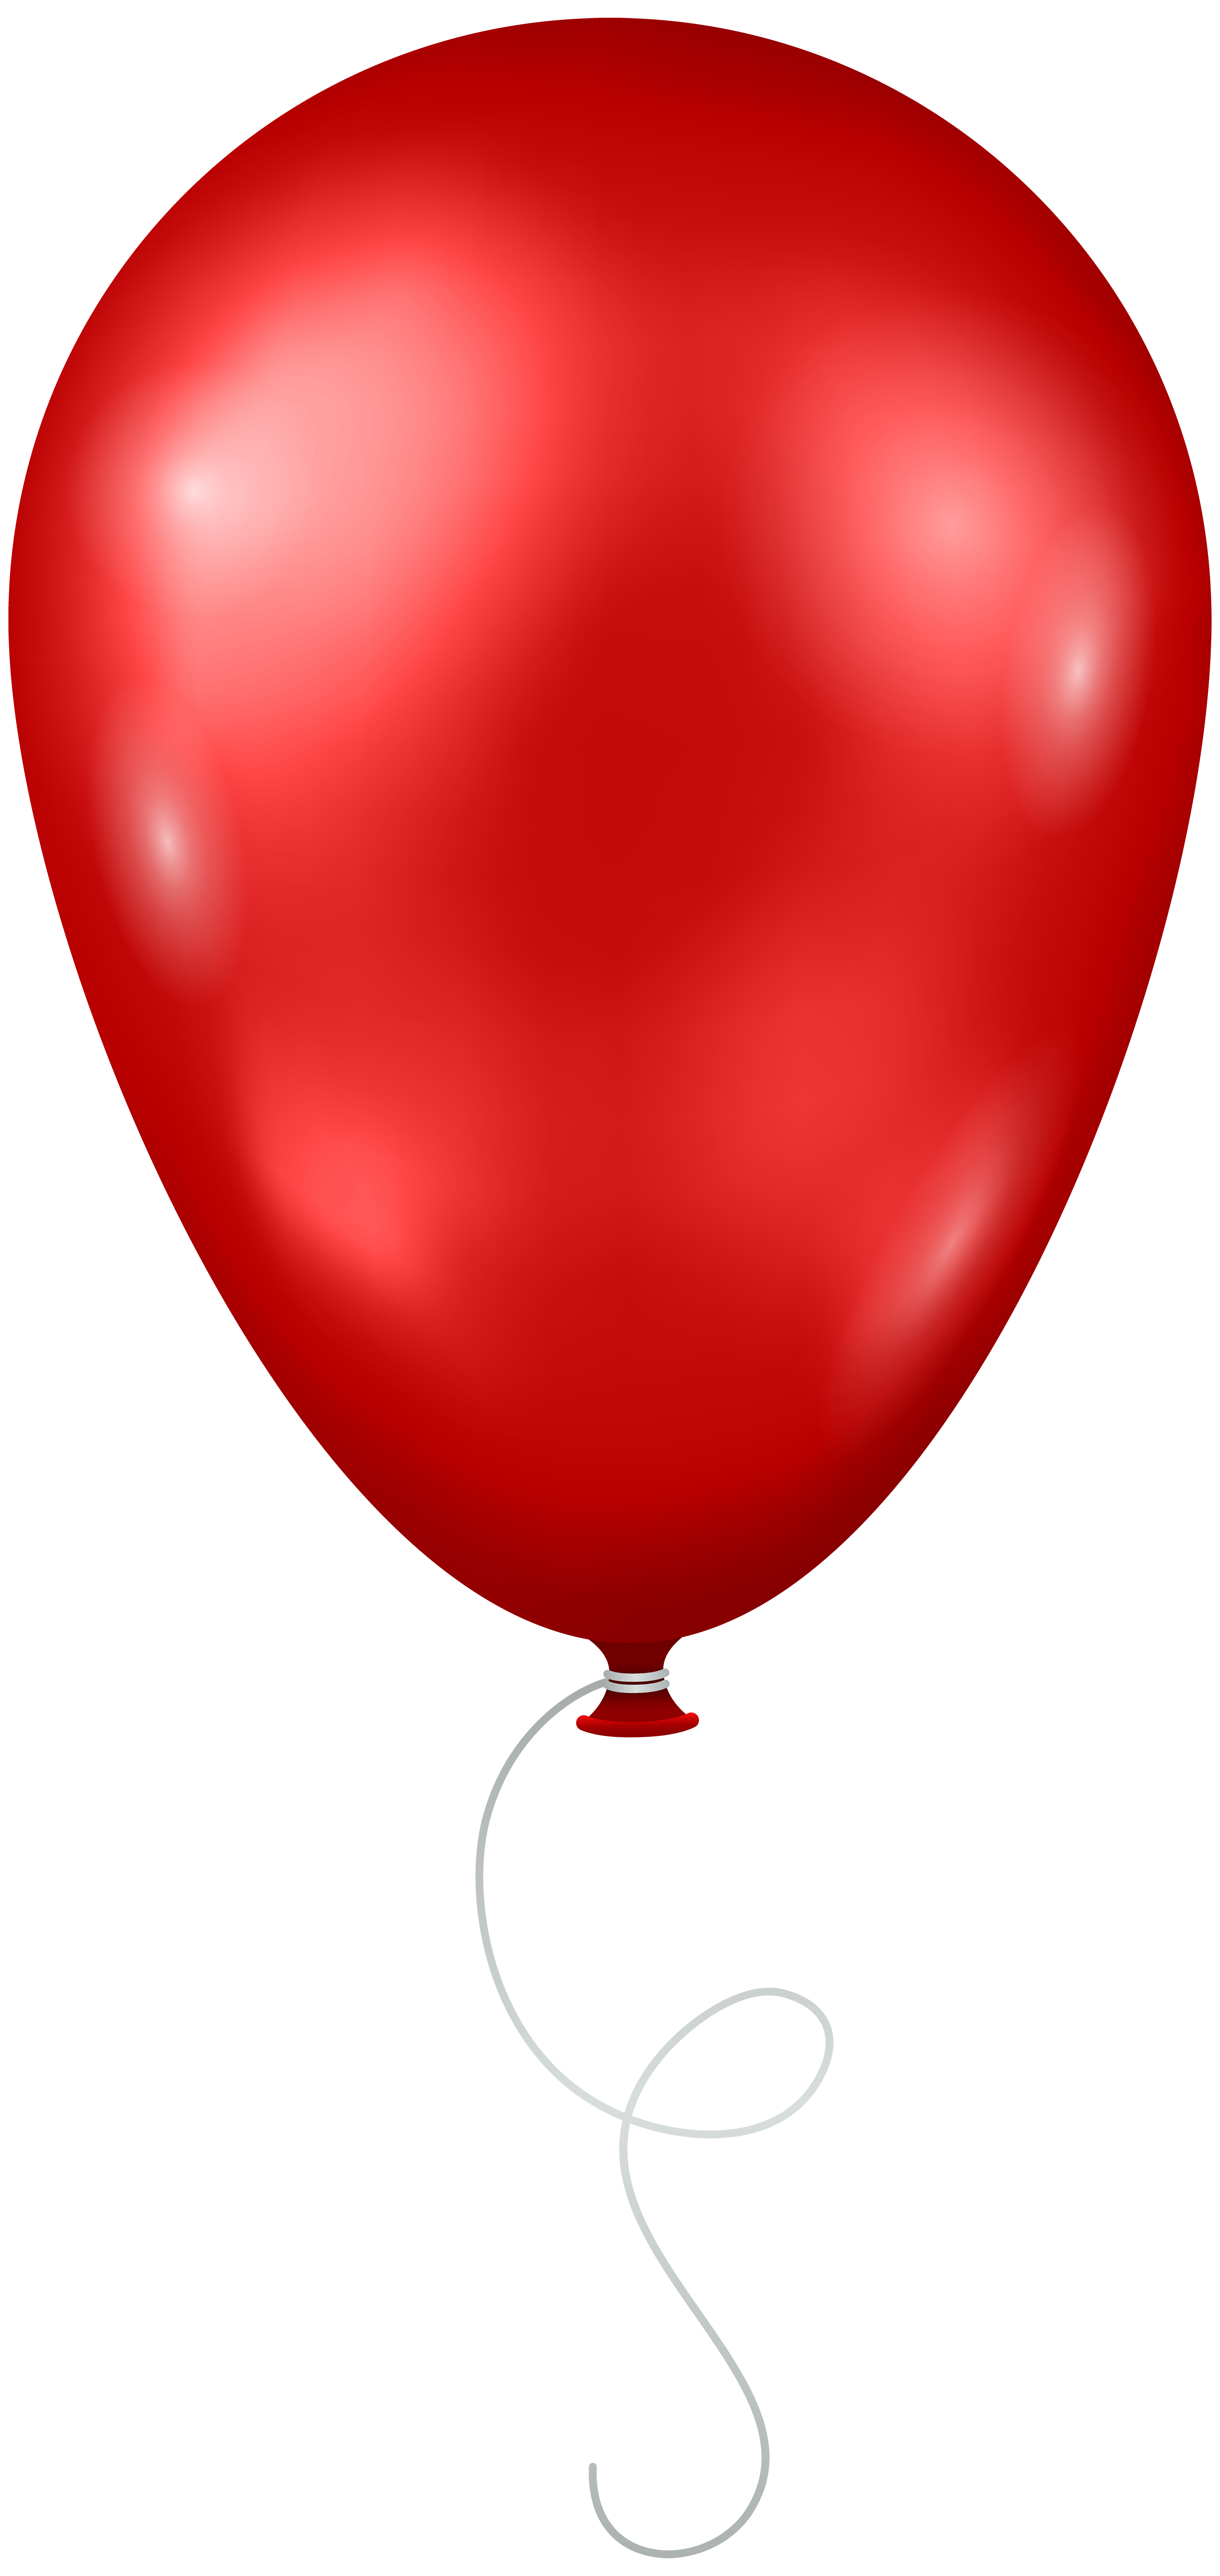 Red Balloon Transparent PNG Clip Art Image.